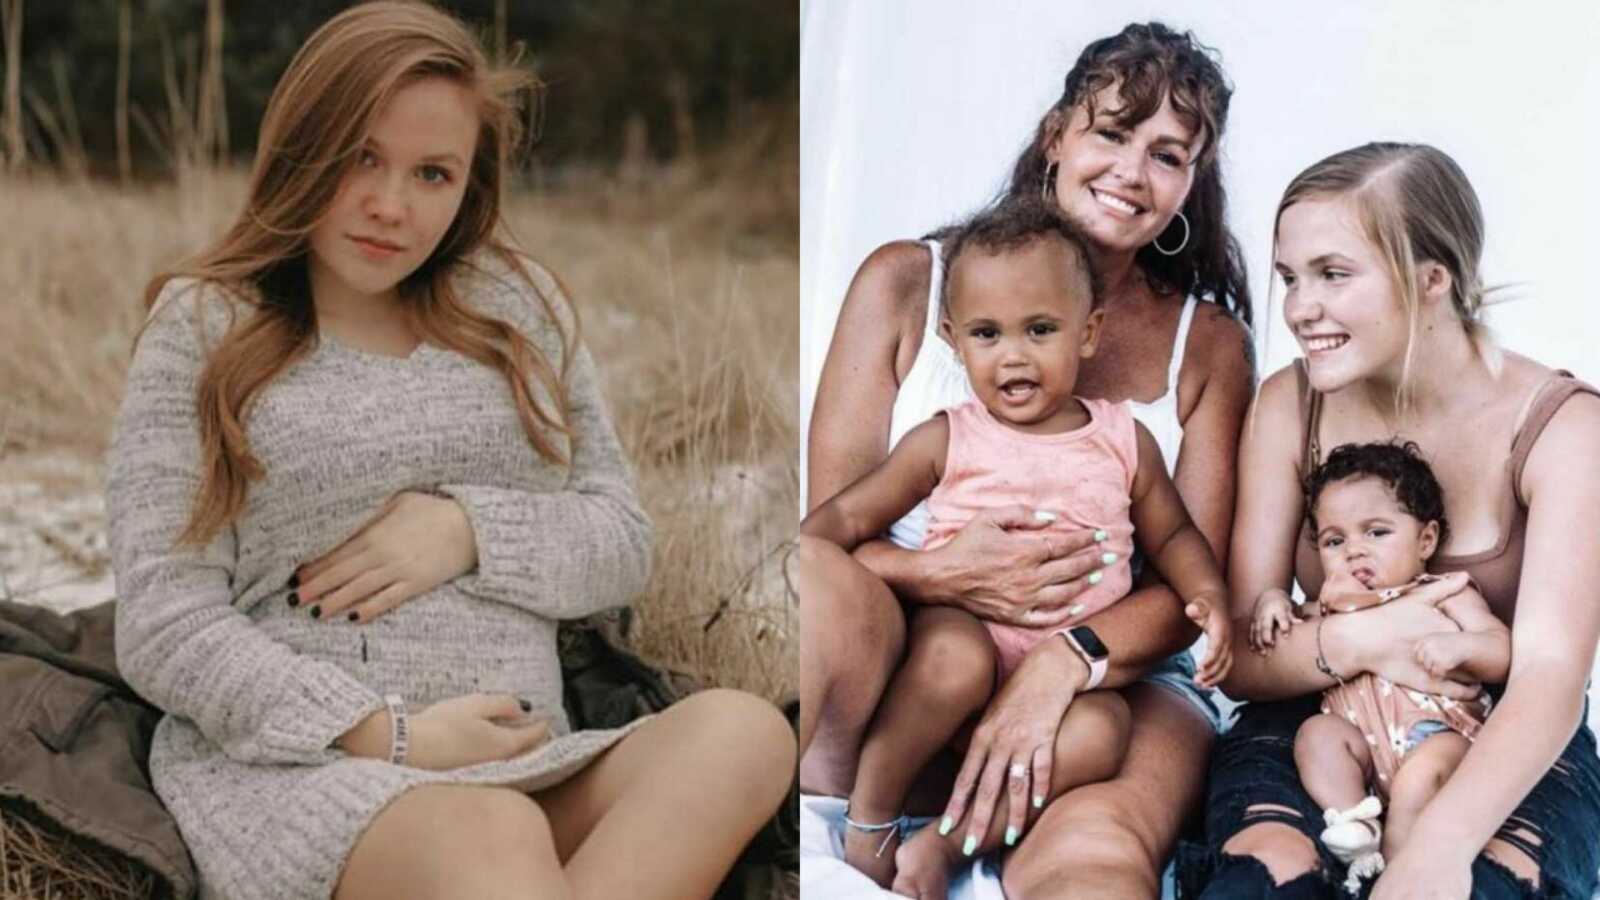 Mom shares daughter's journey through two teen pregnancies